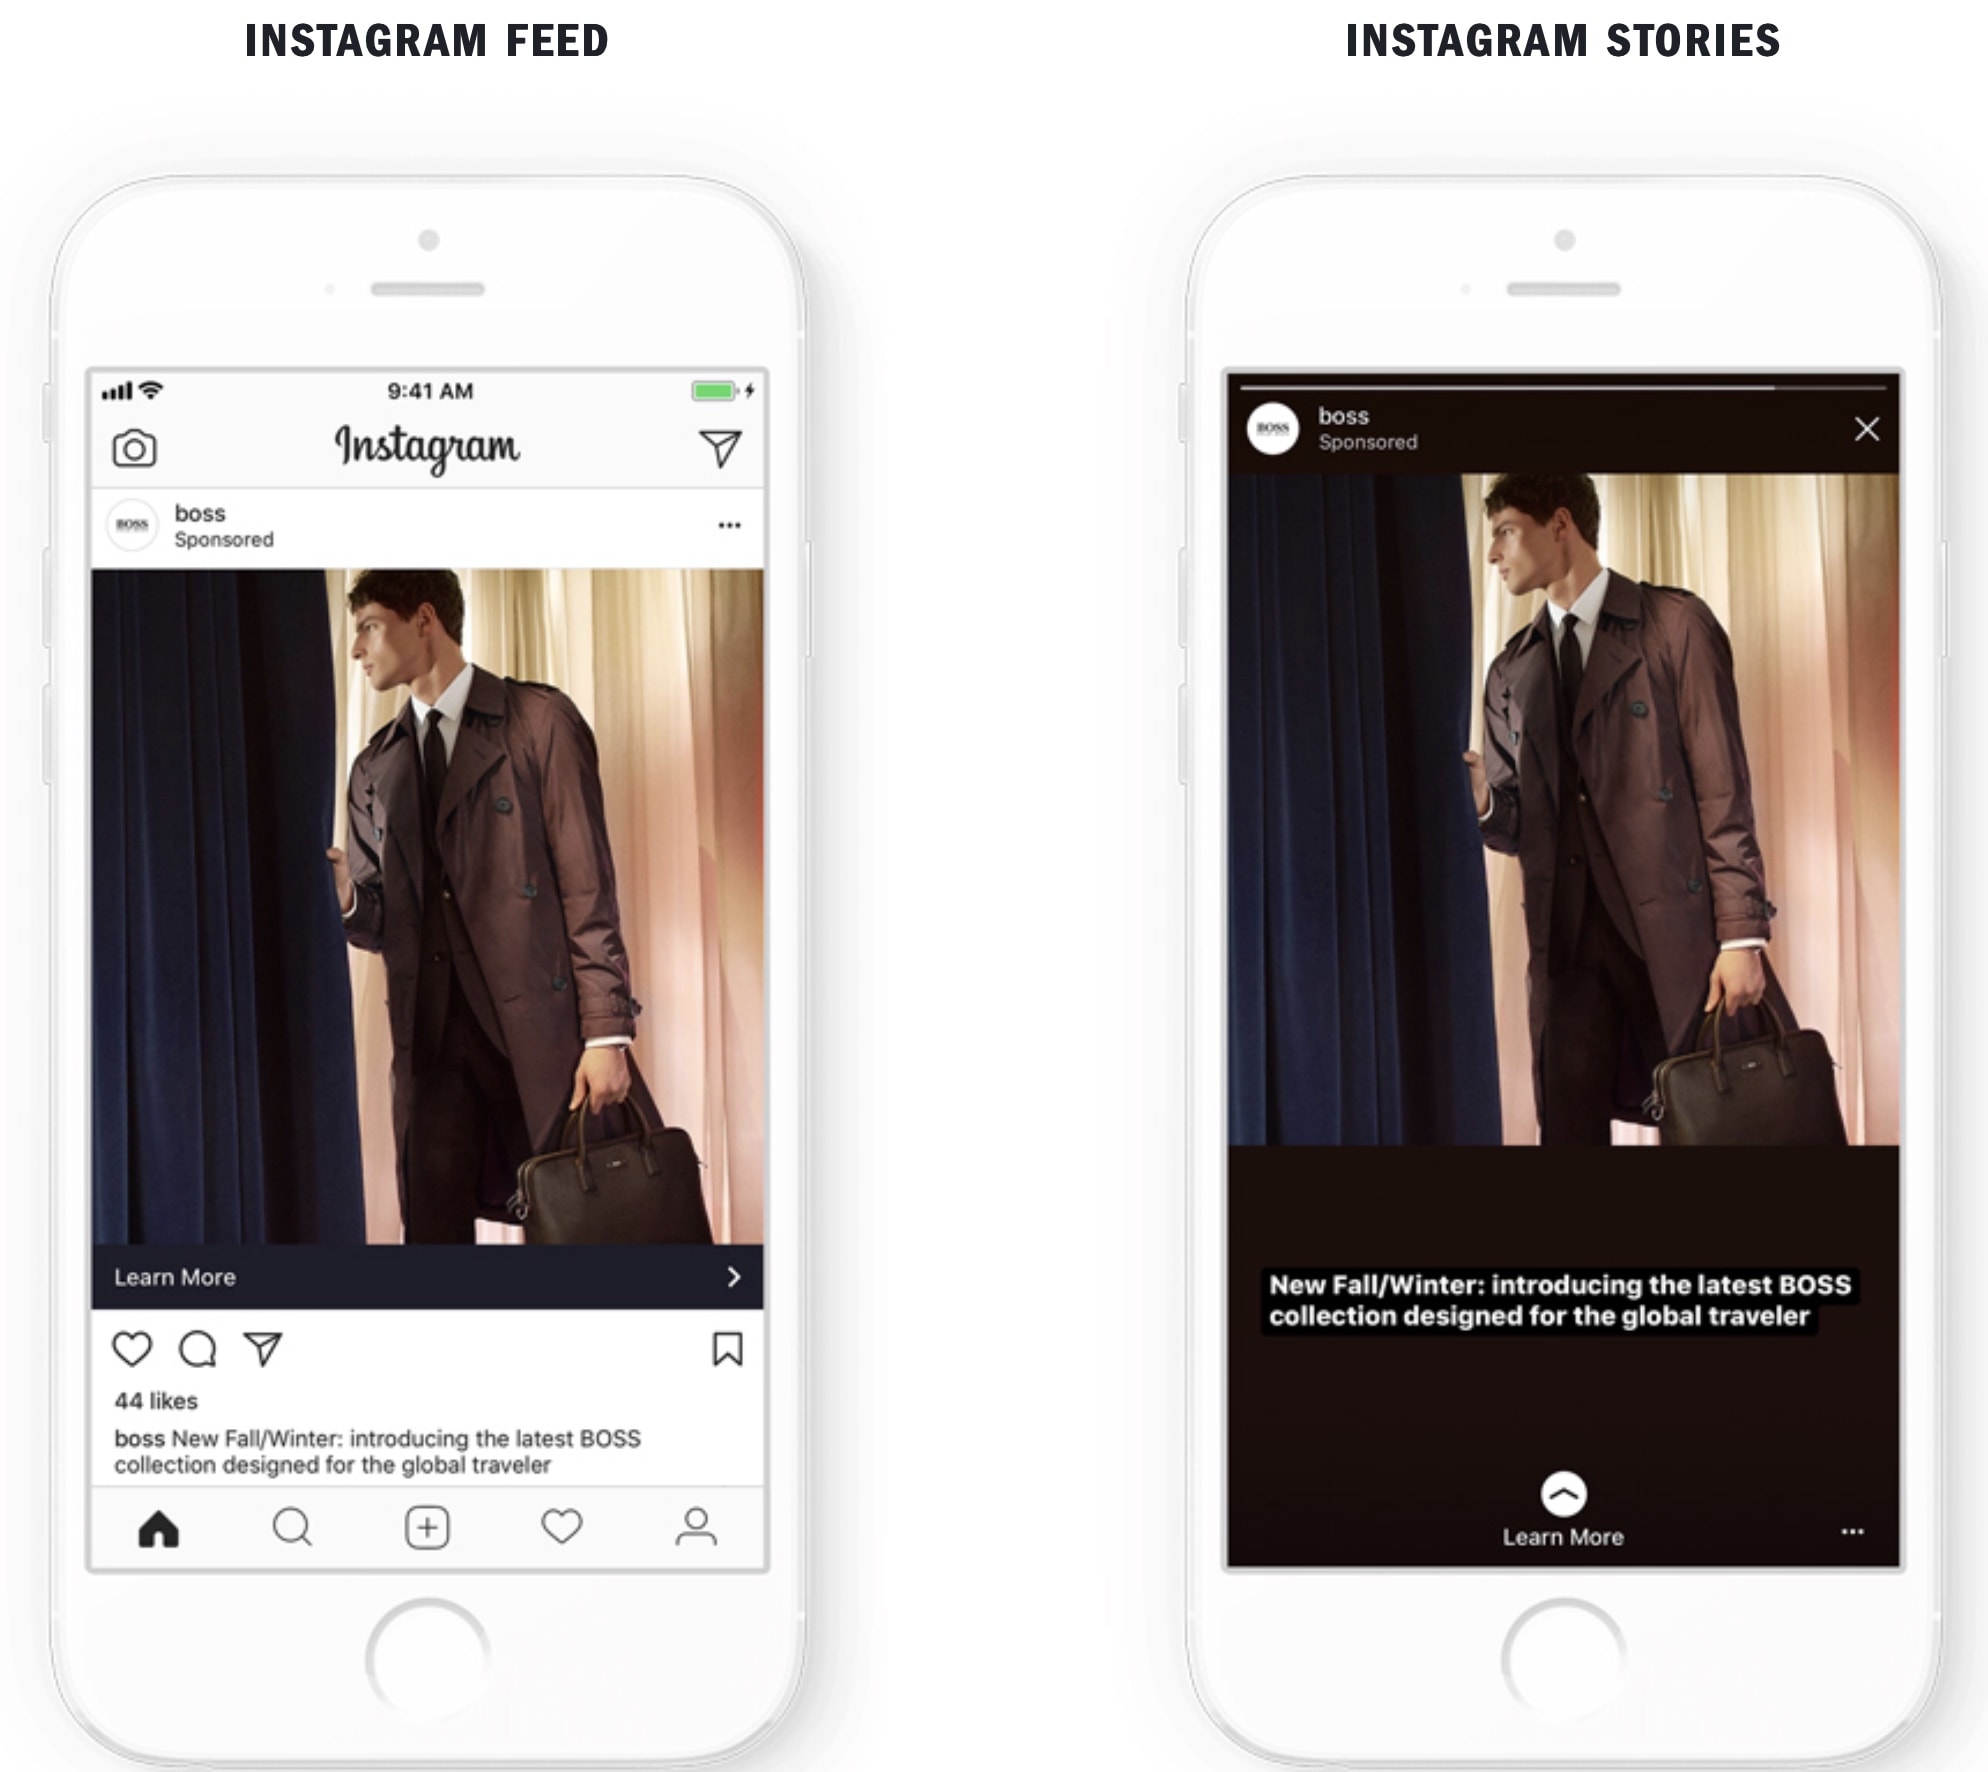 Instagram Introduces Full Screen Support for Ads in Stories